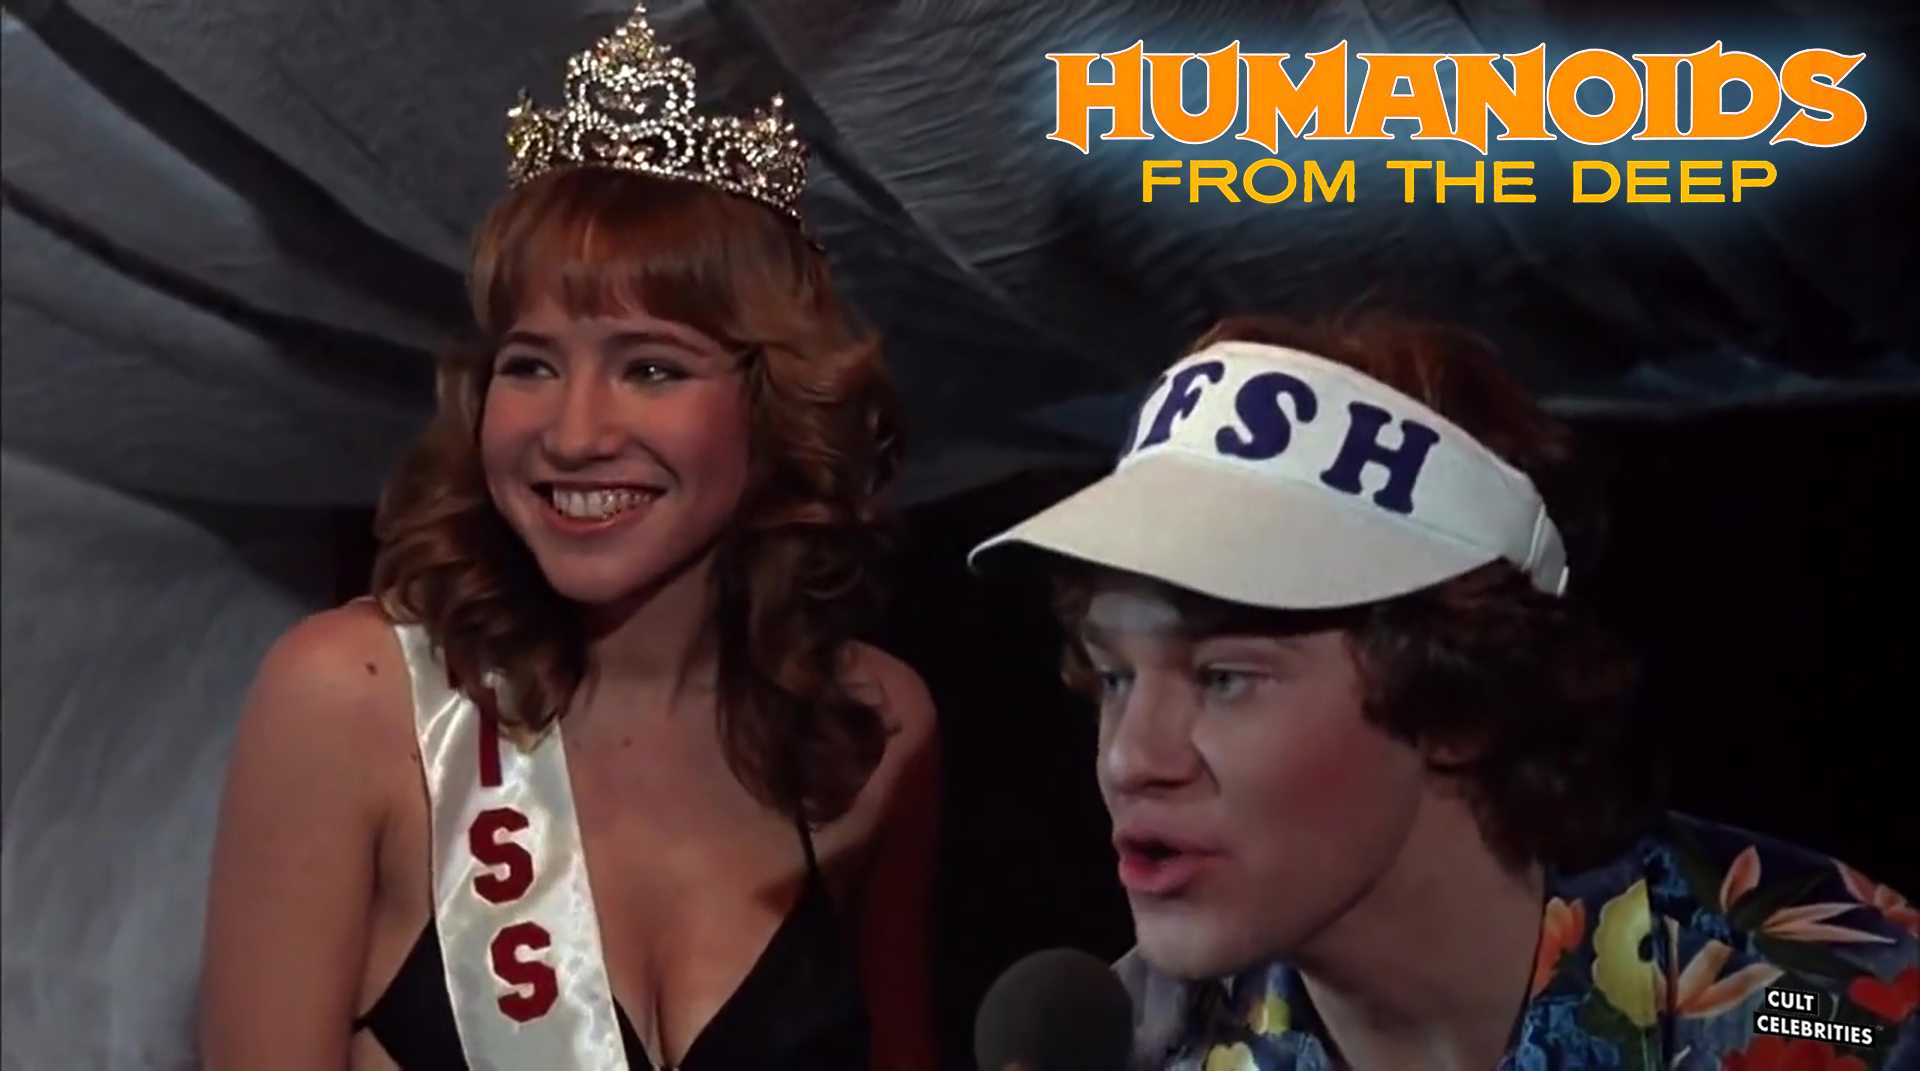 Linda Shayne in Humanoids from the Deep (1980)